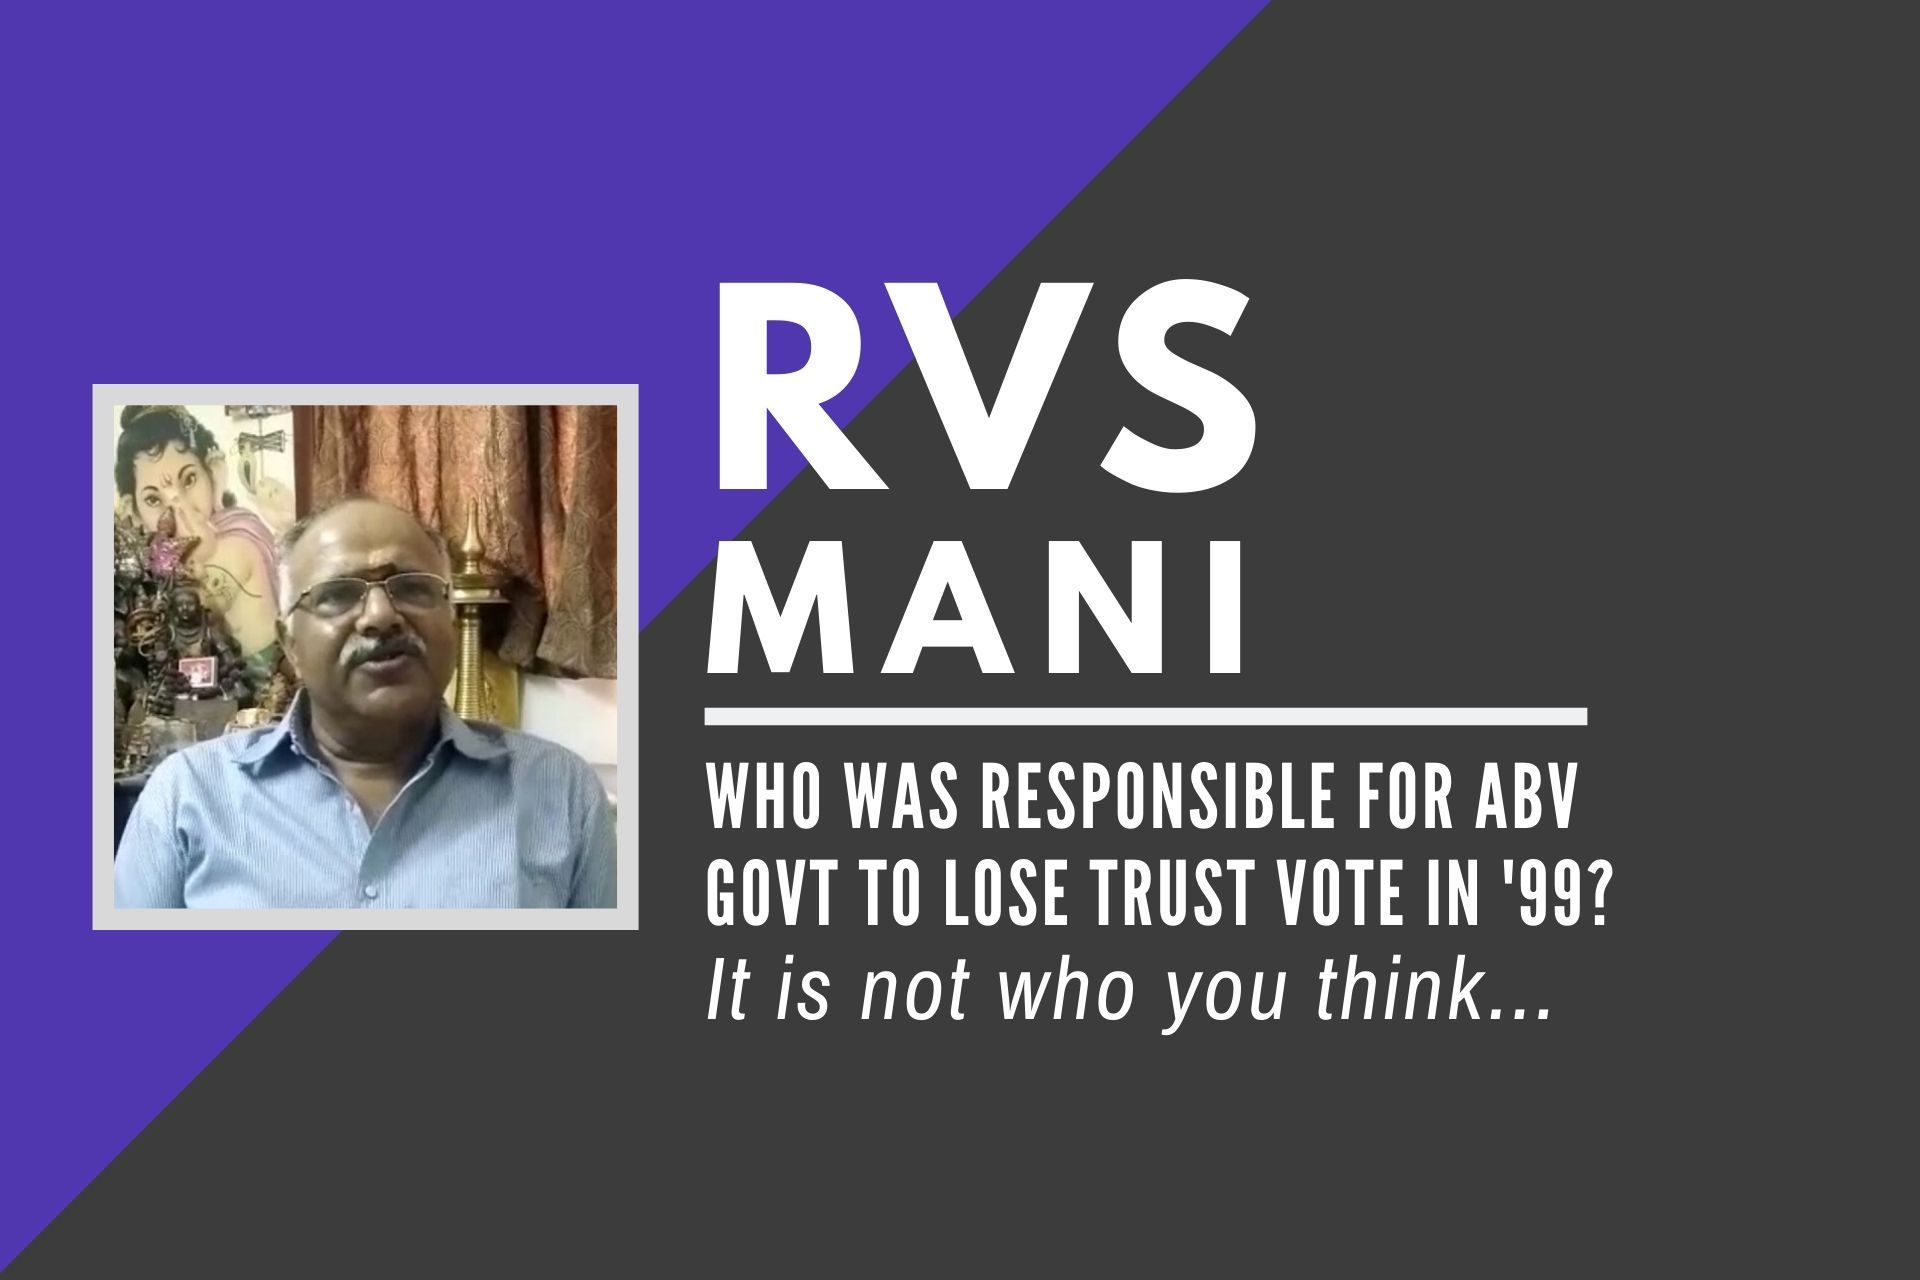 Of all the LS MPs that voted for ABV govt to fall, which was the dodgiest one? Why did the Speaker Balayogi of TDP allow this inebriated CM of Odisha, to vote in the Parliament? RVS Mani explains...